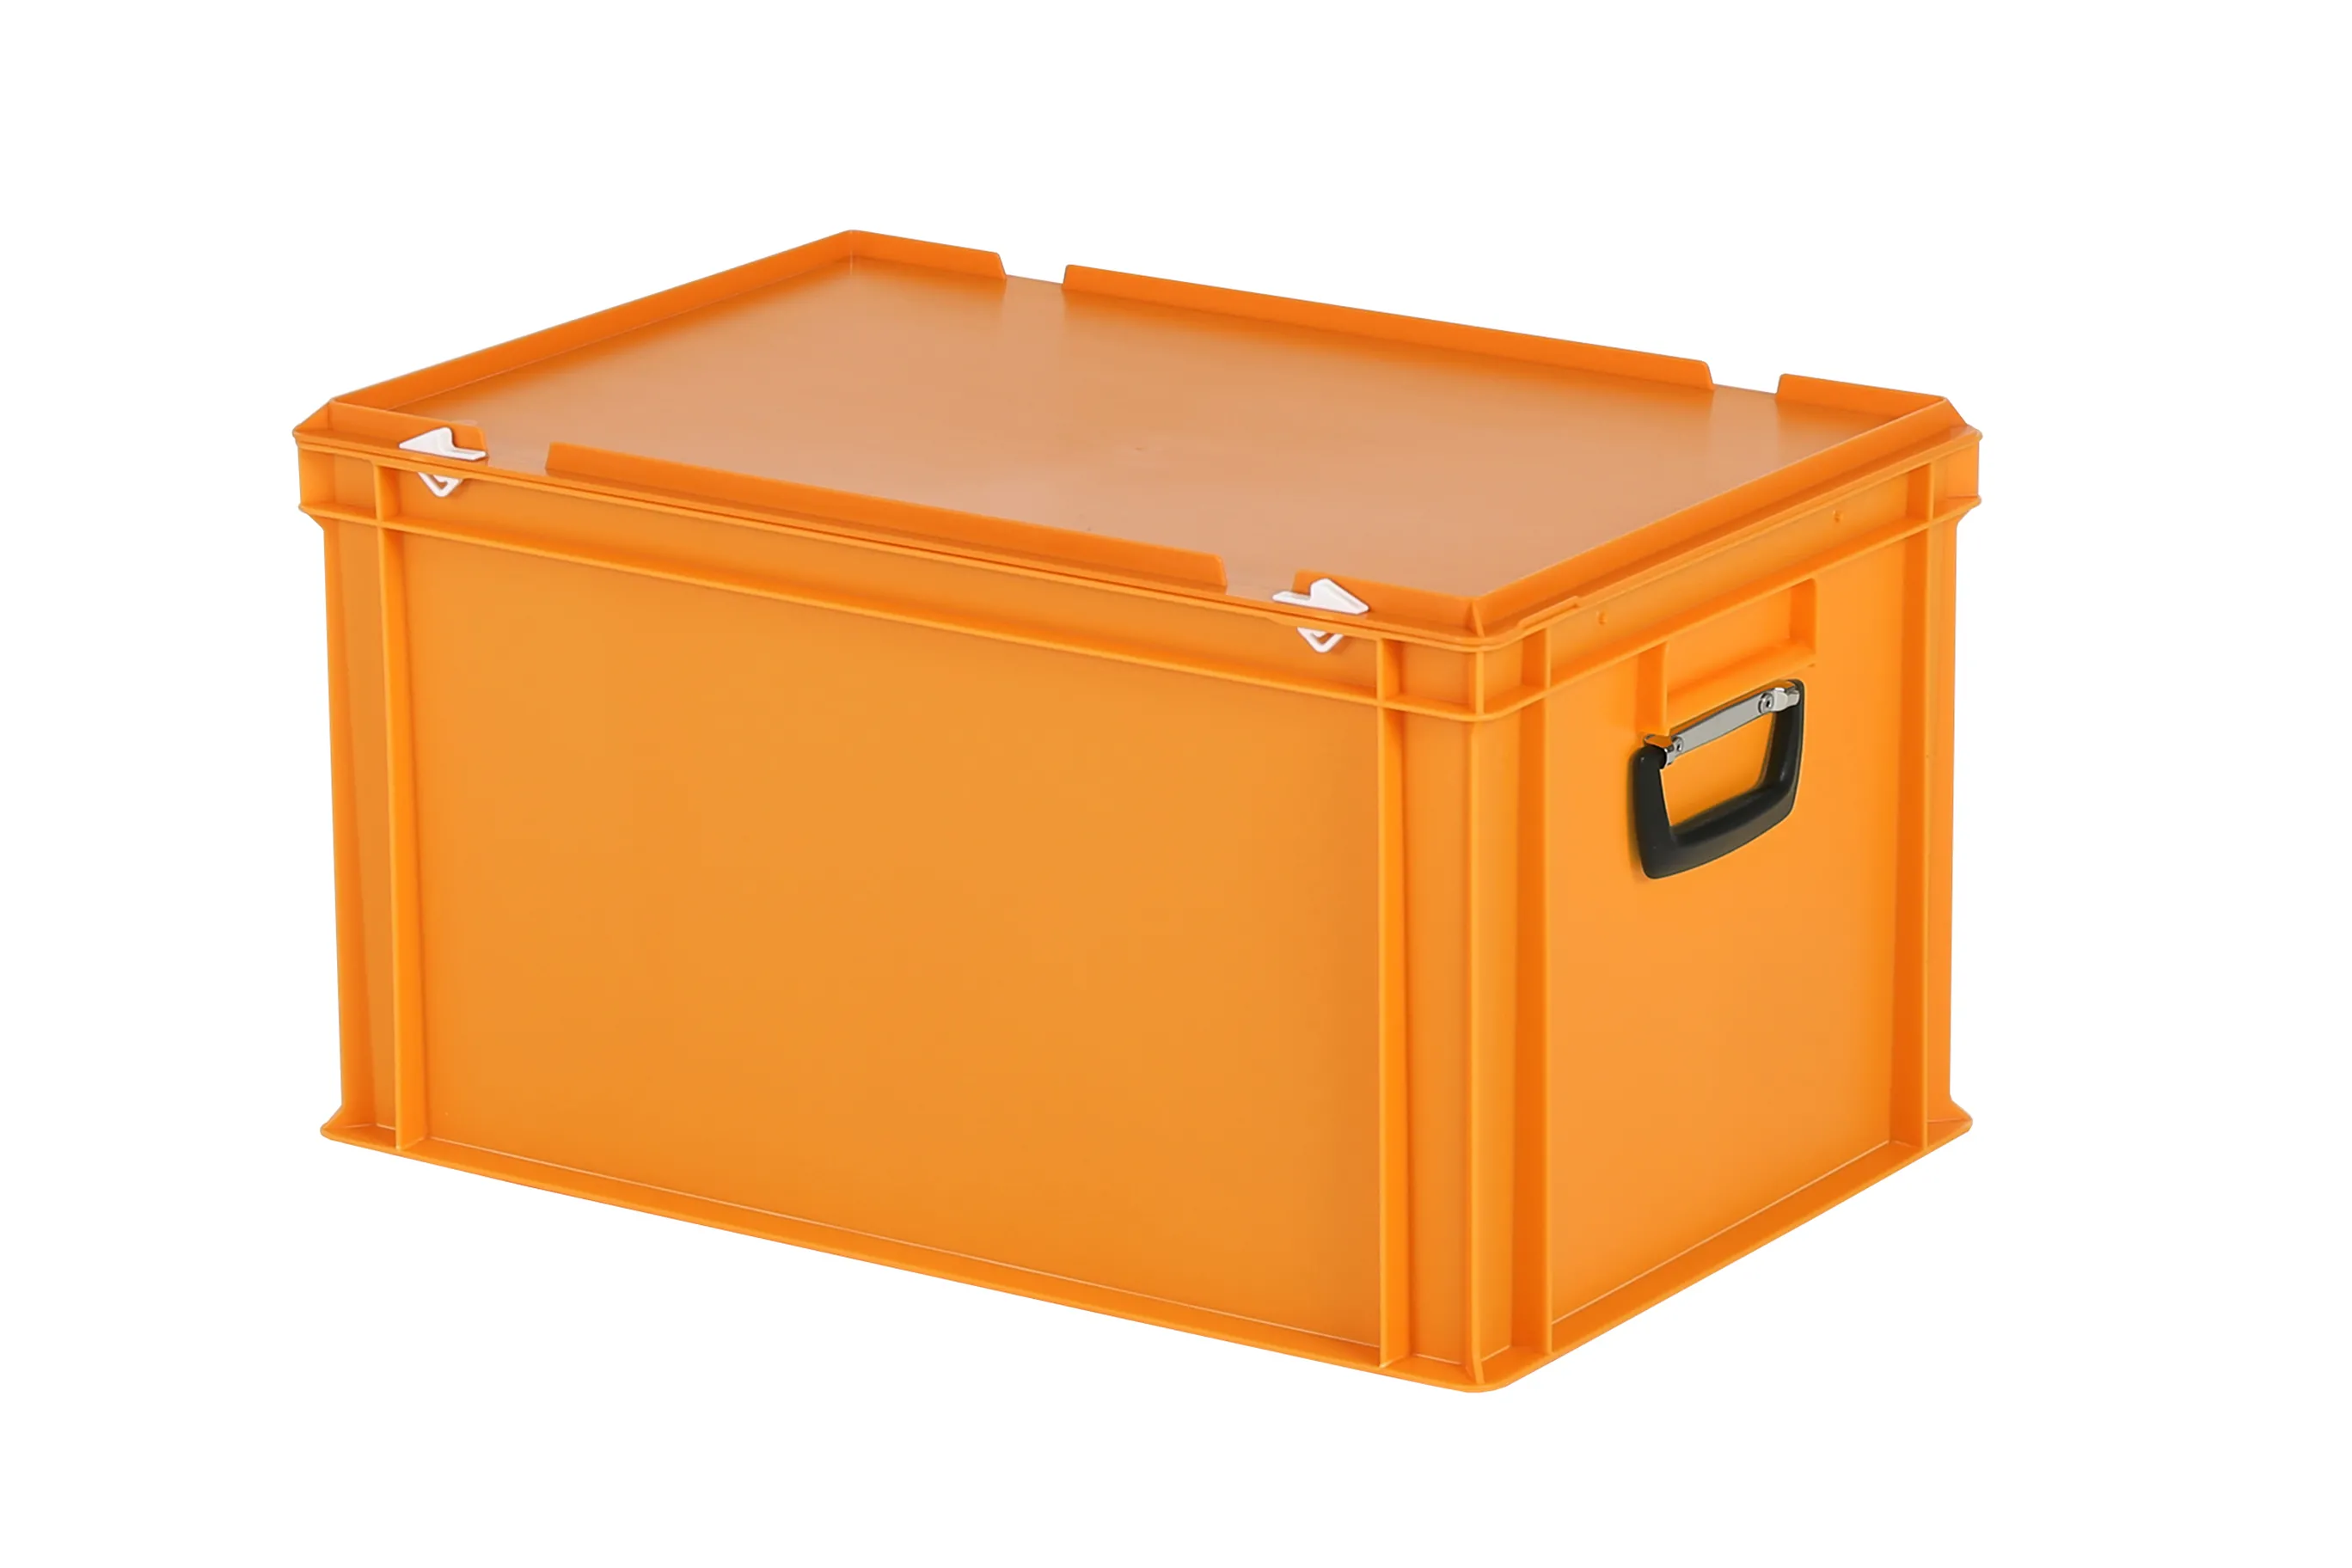 Plastic case - 600 x 400 x H 335 mm - Orange - Stacking bin with lid and case handles